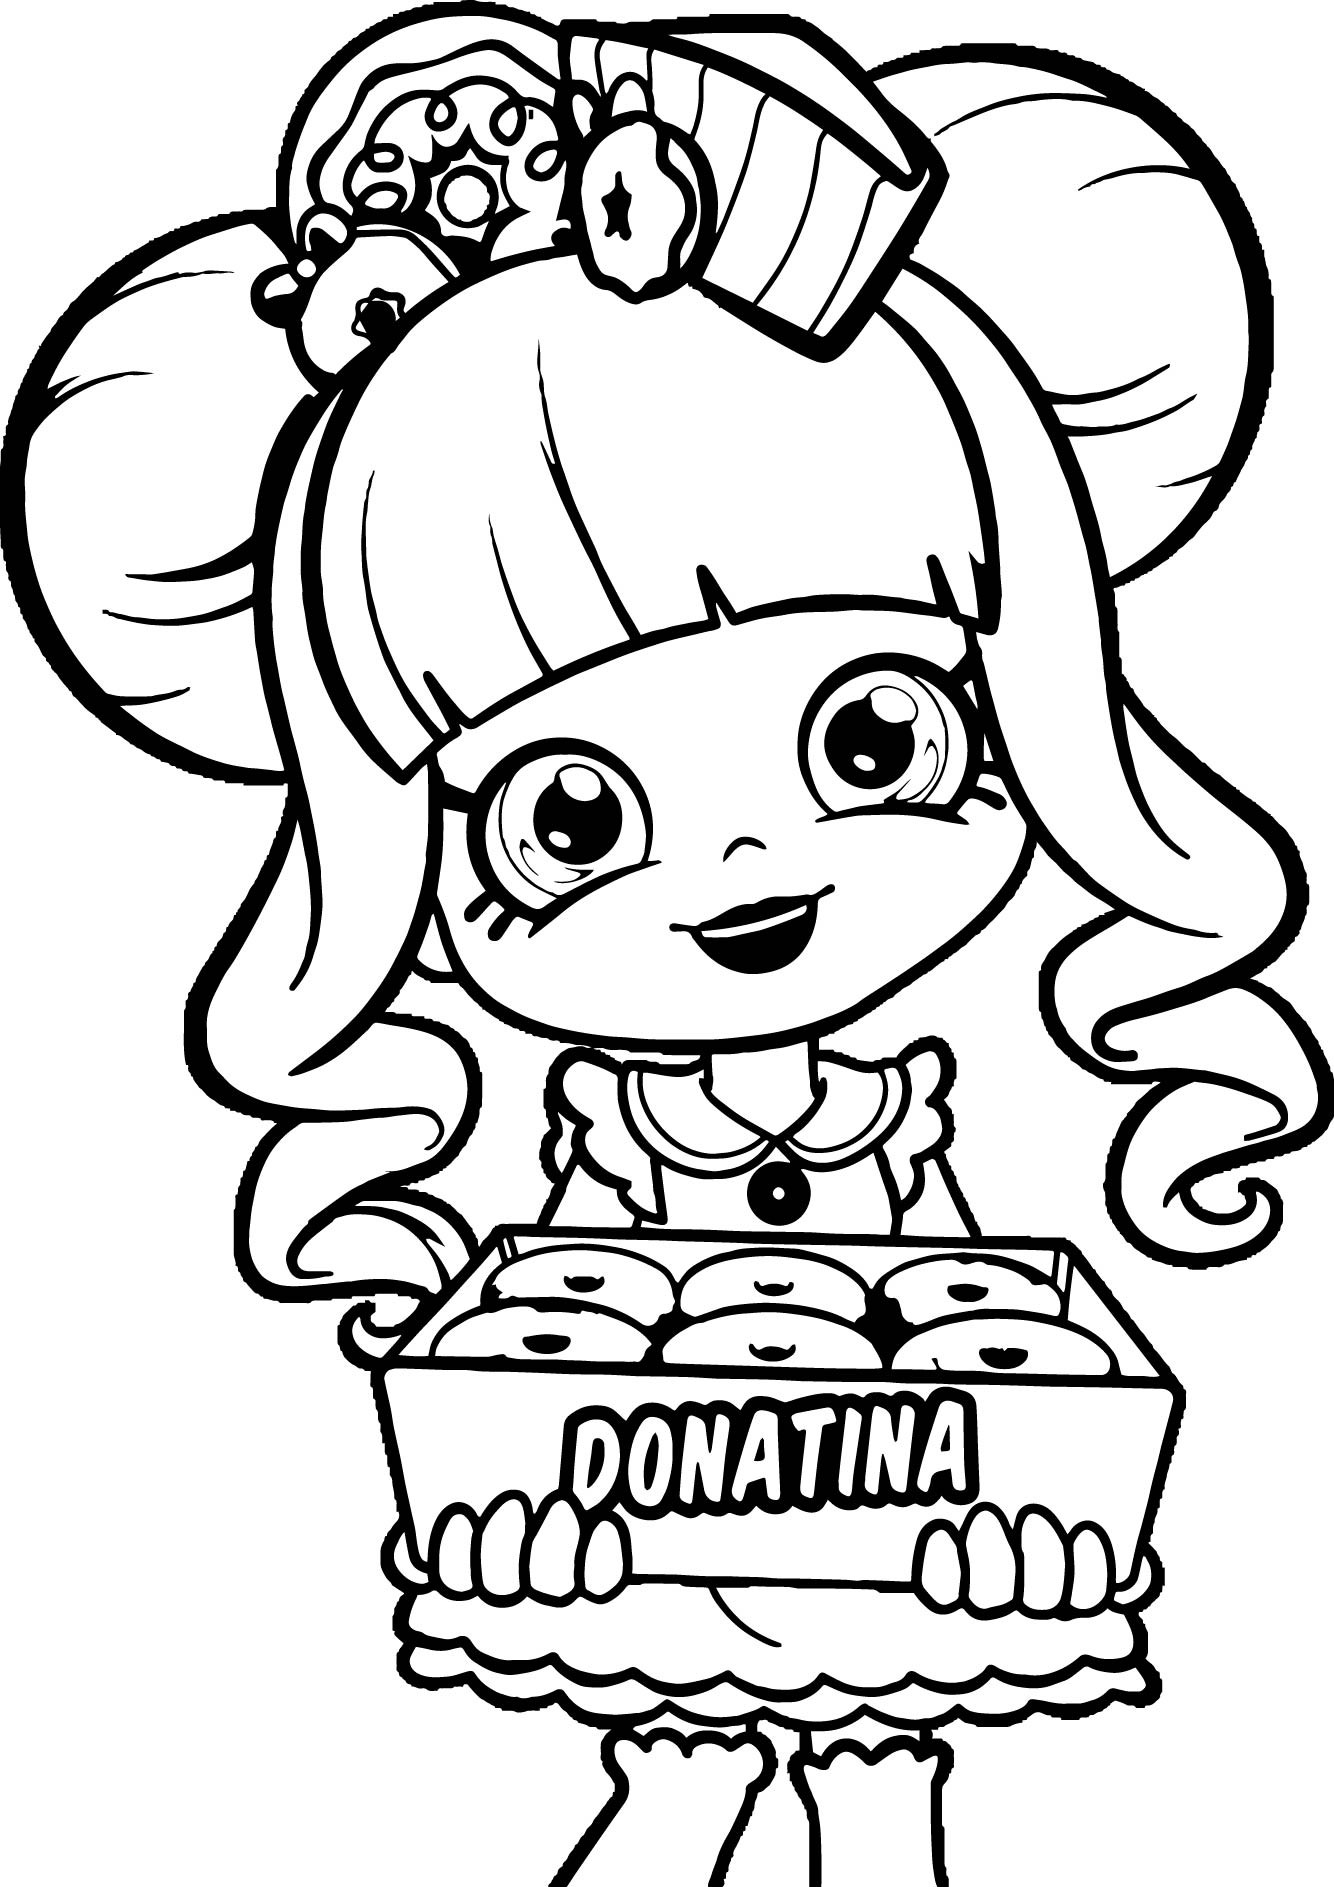 Coloring Pages For Girls Shopkins Apple
 Shopkins Donatina Girl Coloring Page